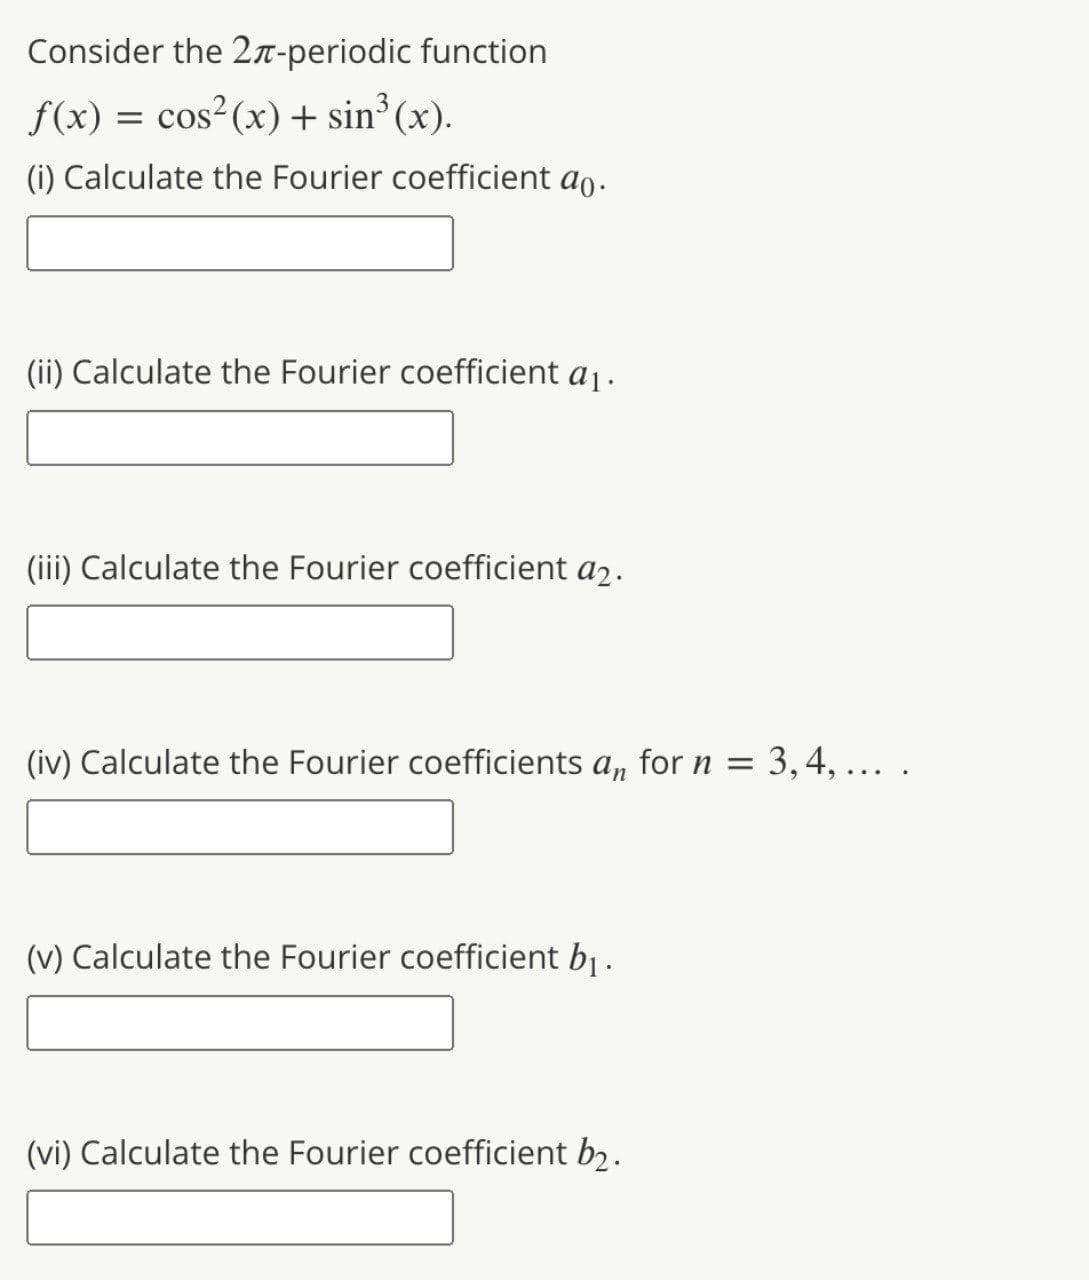 Consider the 2n-periodic function
f(x) = cos²(x) + sin° (x).
(i) Calculate the Fourier coefficient ao.
(ii) Calculate the Fourier coefficient a1.
(iii) Calculate the Fourier coefficient a2.
(iv) Calculate the Fourier coefficients a, for n =
3, 4, ...
(v) Calculate the Fourier coefficient b.
(vi) Calculate the Fourier coefficient b2.
